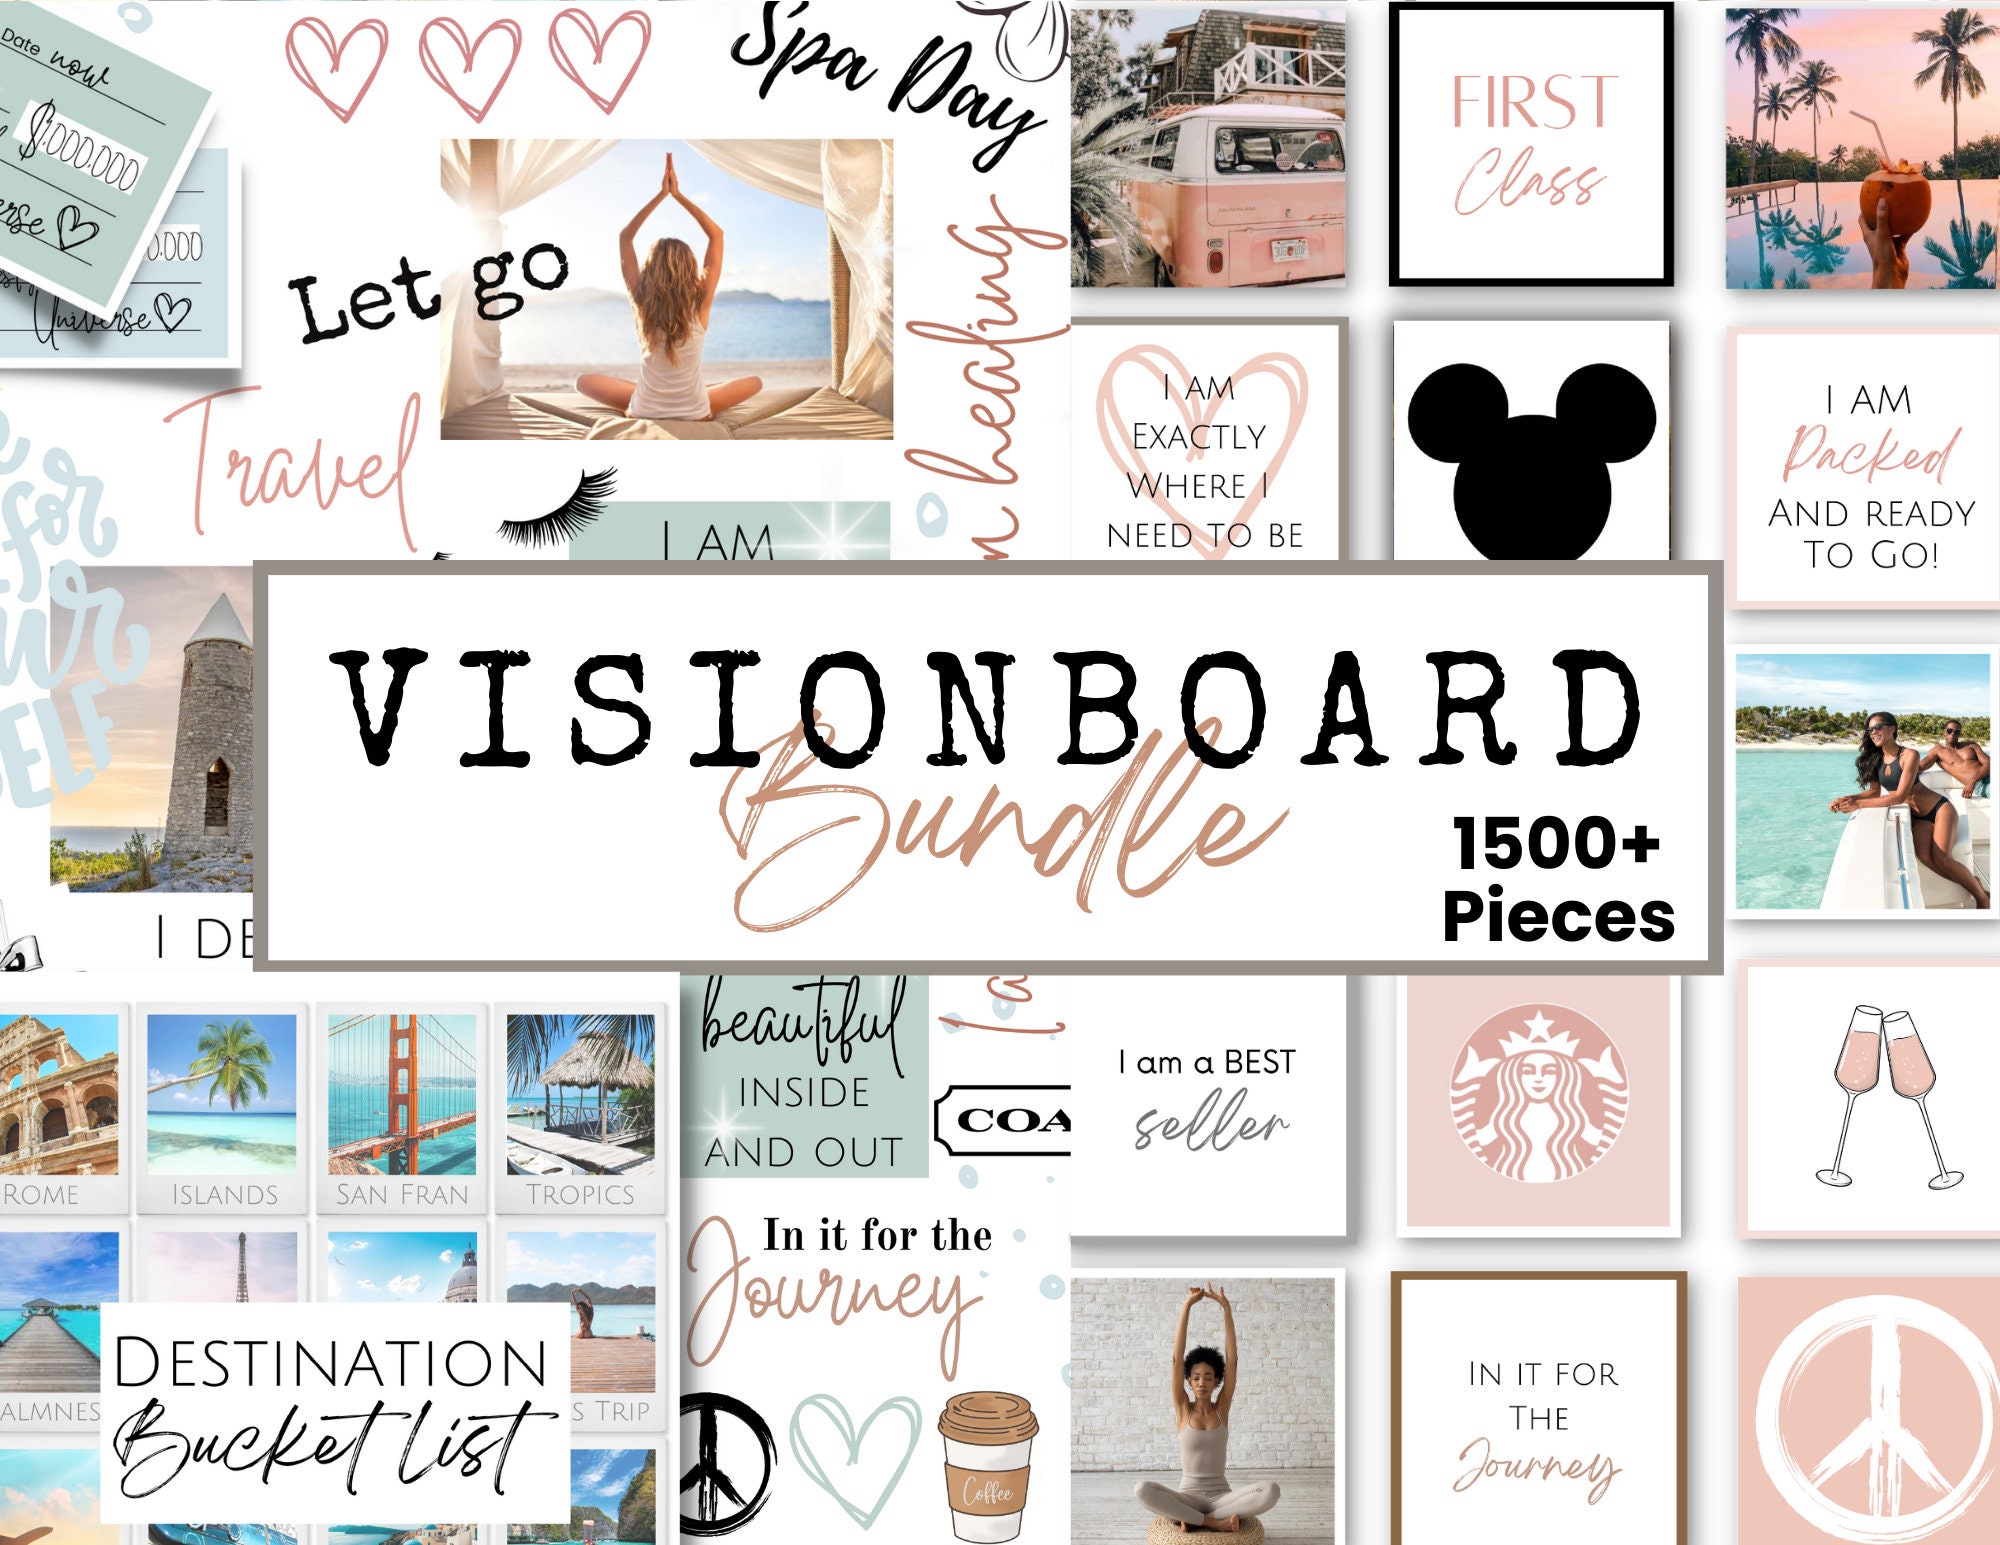 Vision Board Clip Art Book For Black Women: 200+ Inspiring Pictures,  Affirmation Cards and Words Vision Board Supplies For Black Women (Vision  Board